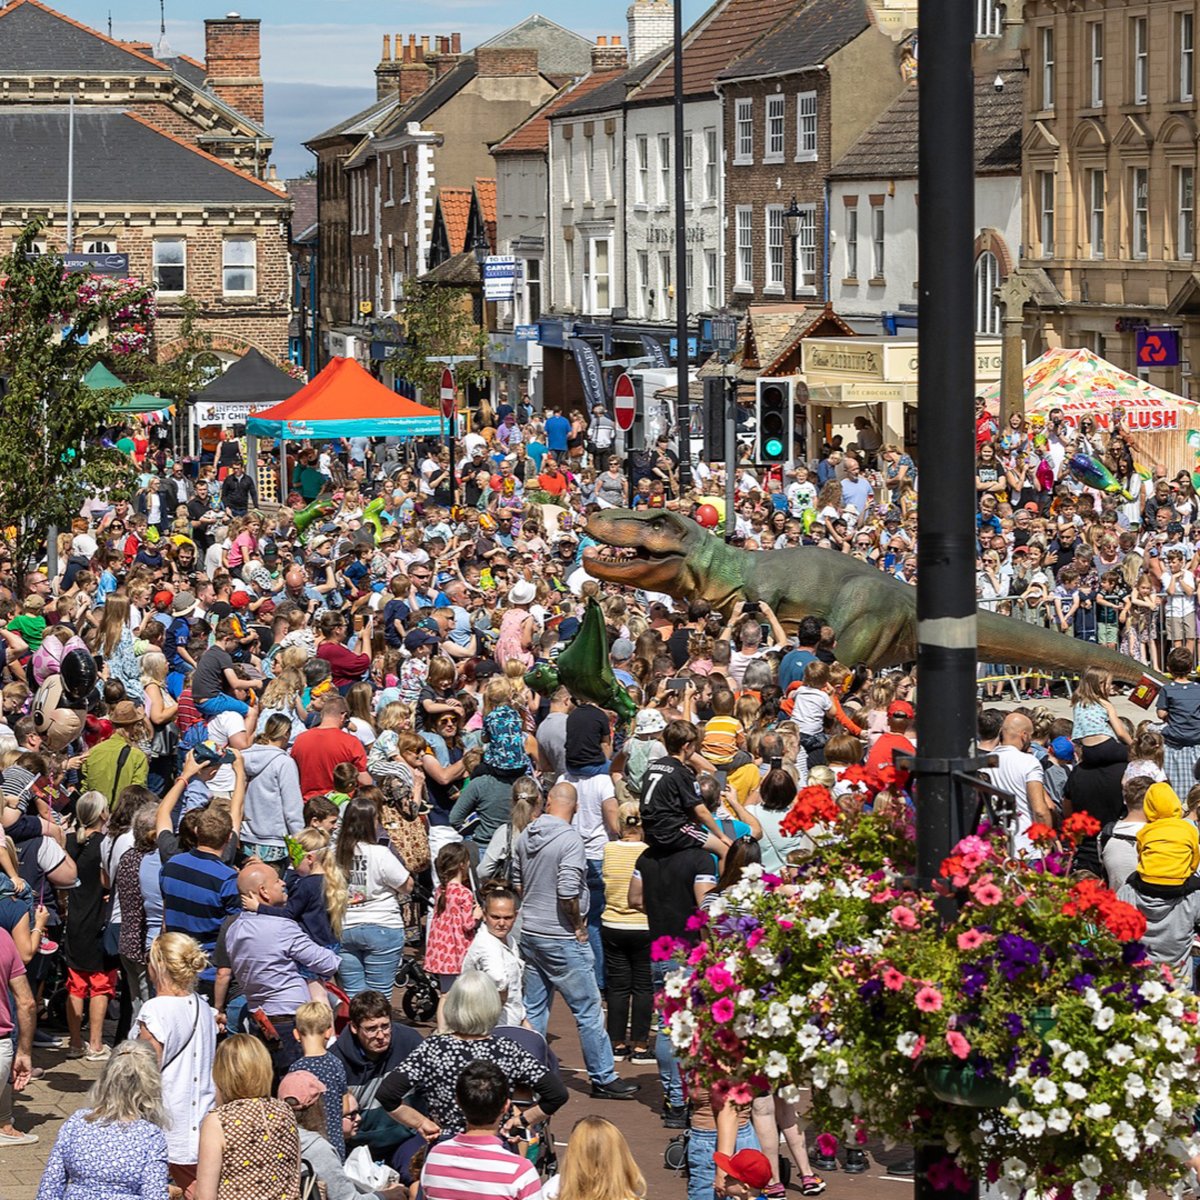 Who's excited for Jurassic Northallerton 2.0?! 🦕🙌🦖

This FREE family event returns on Sun 6th August 11am - 4pm. Find our Friends of the Friarage stall where we will have cakes, games and competitions to enter!

#jurassicnorthallerton #friendsofthefriarage #lovenorthallerton